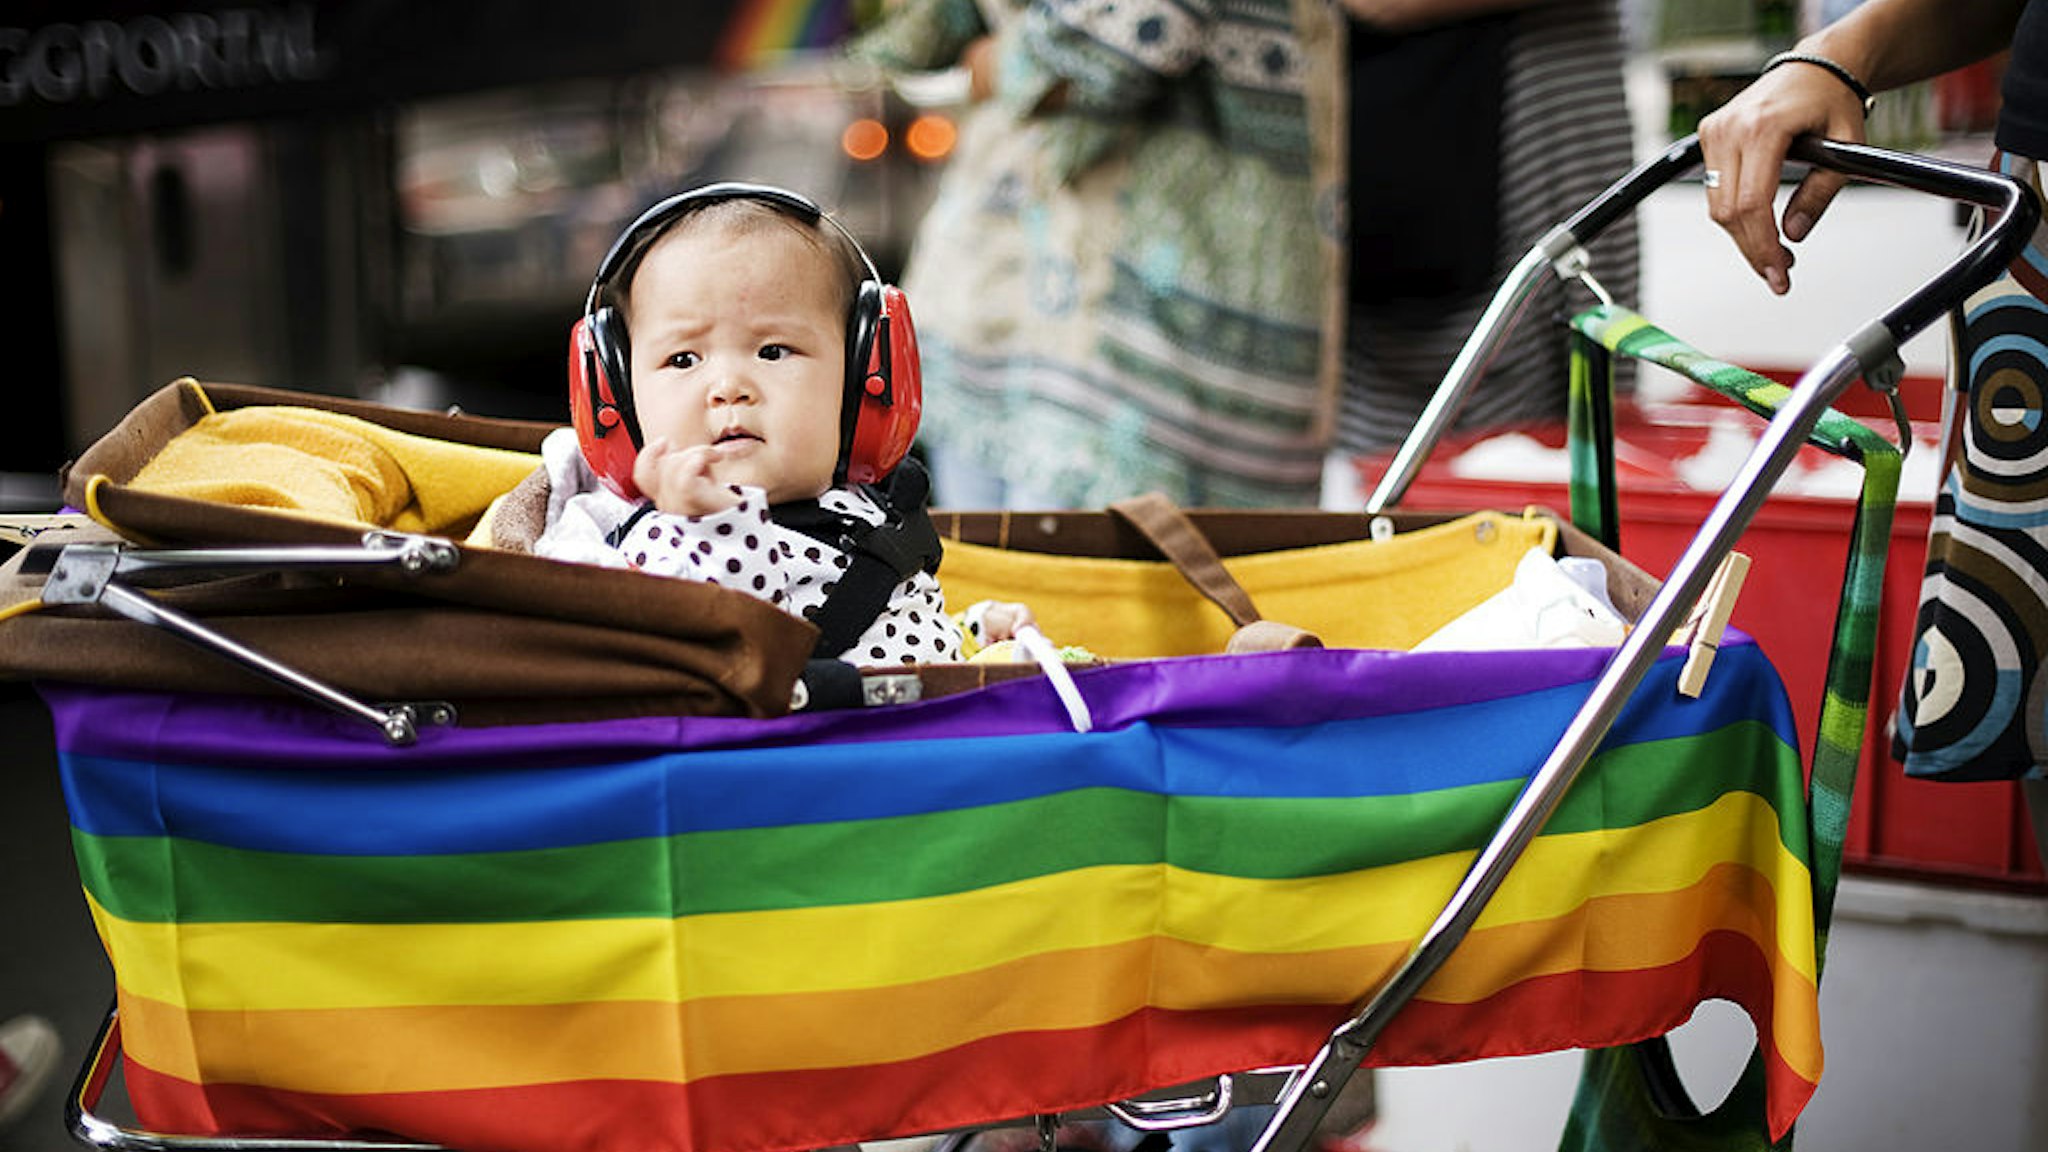 A child with ear-protection gear looks on during the HBTQ festival "Stockholm Pride" parade on August 6, 2011 in central Stockholm.